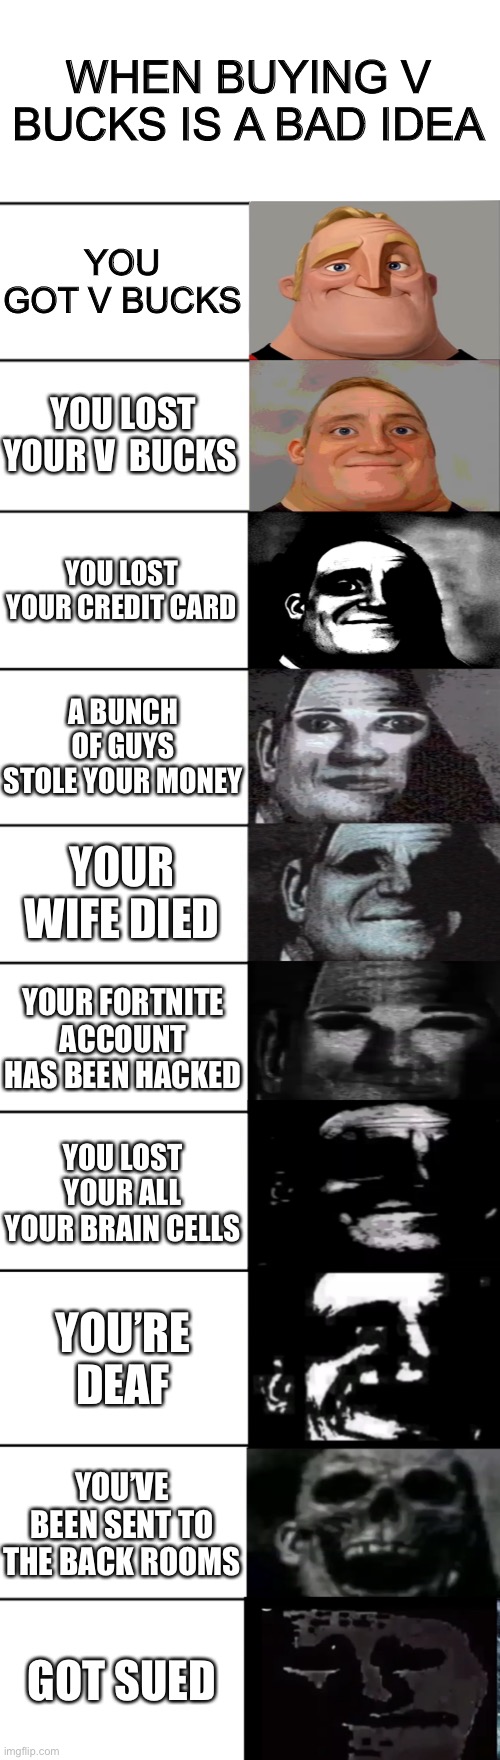 Buying v bucks | WHEN BUYING V BUCKS IS A BAD IDEA; YOU GOT V BUCKS; YOU LOST YOUR V  BUCKS; YOU LOST YOUR CREDIT CARD; A BUNCH OF GUYS STOLE YOUR MONEY; YOUR WIFE DIED; YOUR FORTNITE ACCOUNT HAS BEEN HACKED; YOU LOST YOUR ALL YOUR BRAIN CELLS; YOU’RE DEAF; YOU’VE BEEN SENT TO THE BACK ROOMS; GOT SUED | image tagged in mr incredible becoming uncanny | made w/ Imgflip meme maker